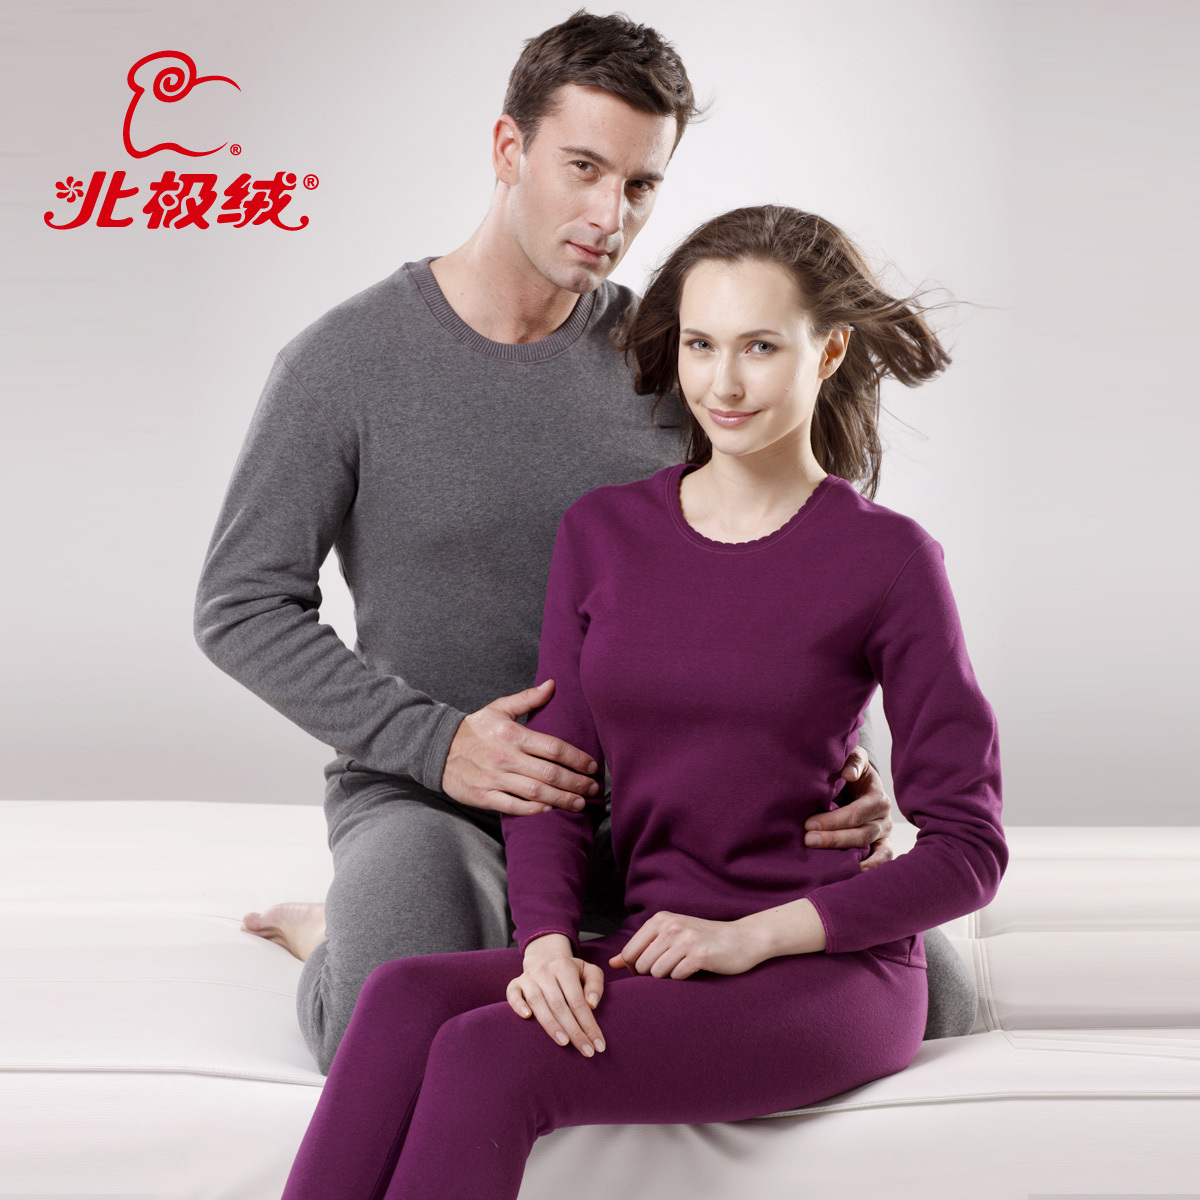 Wool magnetic therapy plus velvet thickening thermal underwear male women's set thermal clothing 1 set